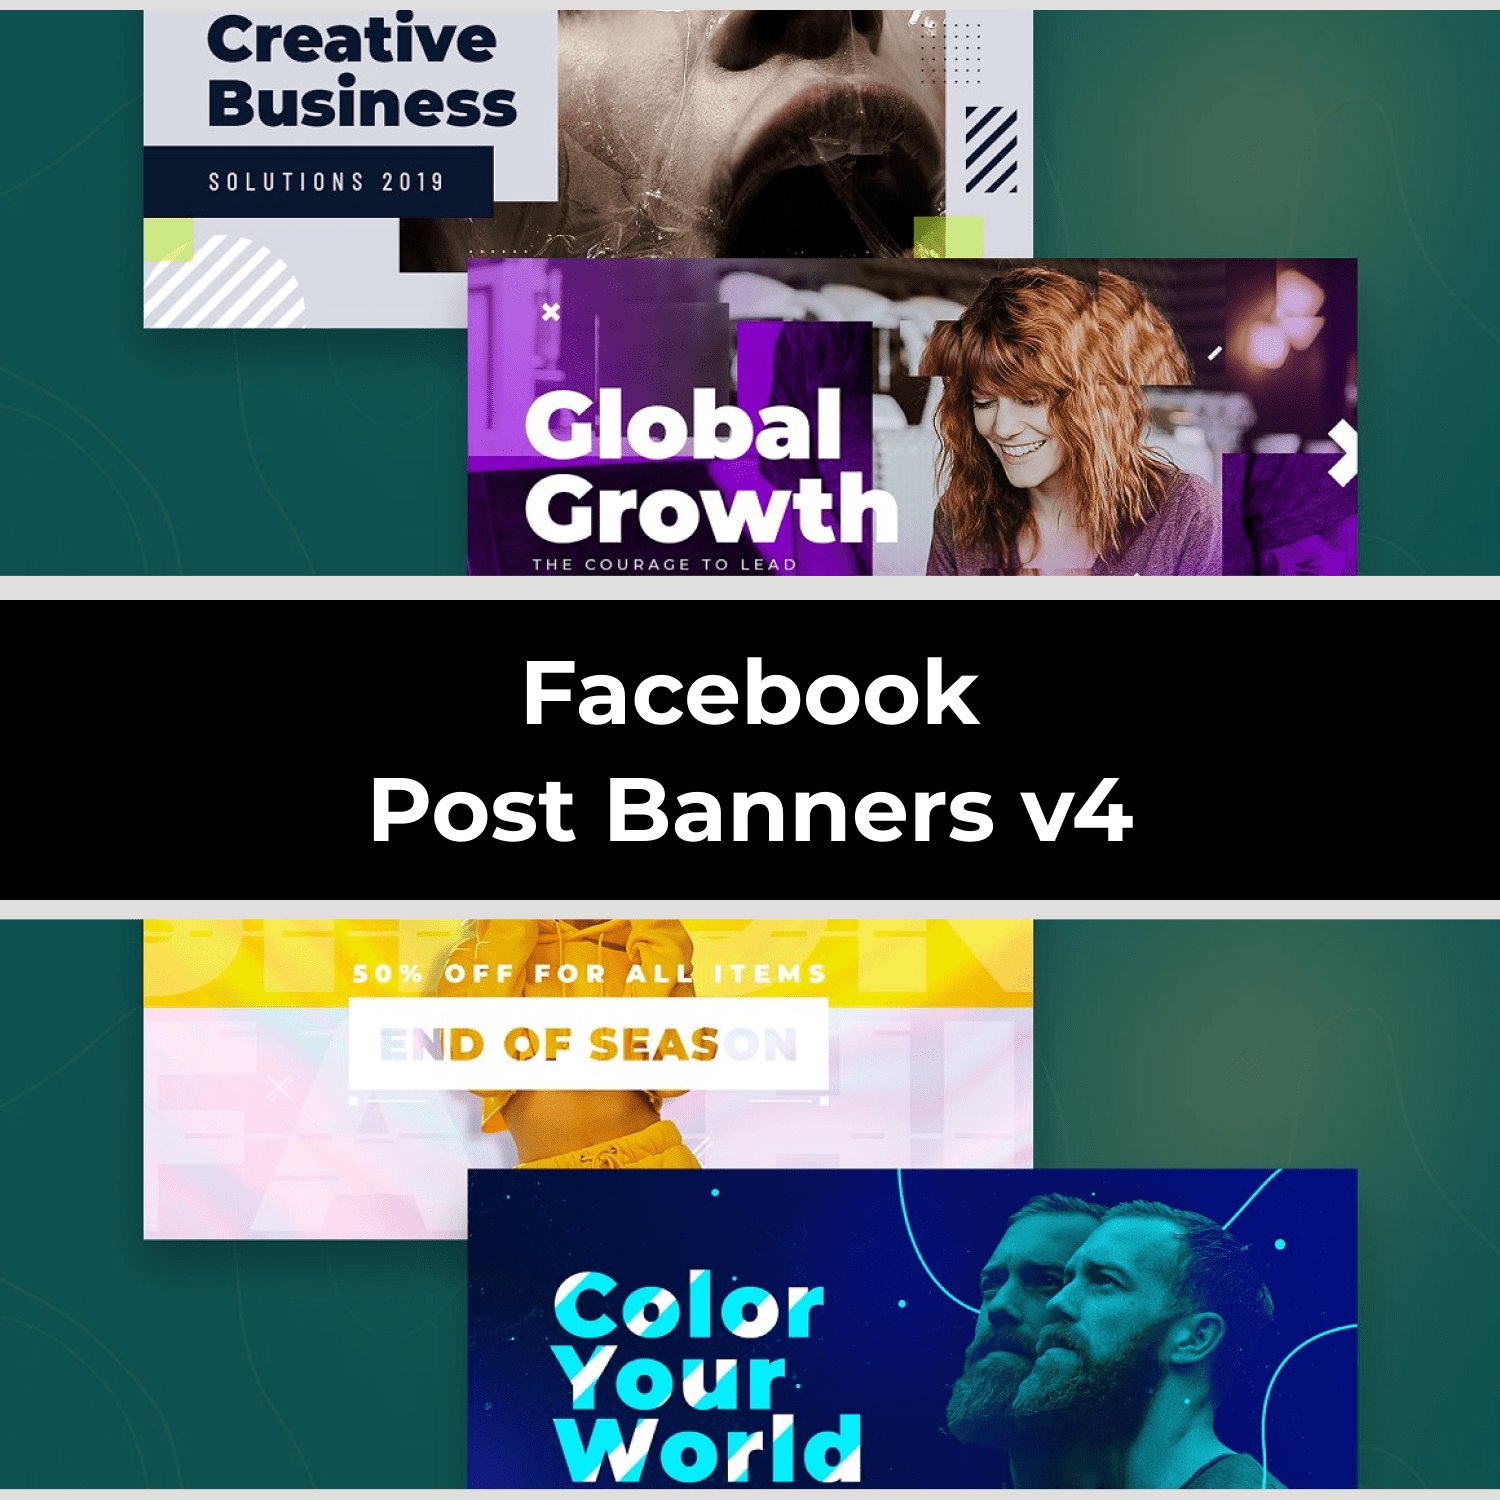 Facebook Post Banners v4 cover imge.